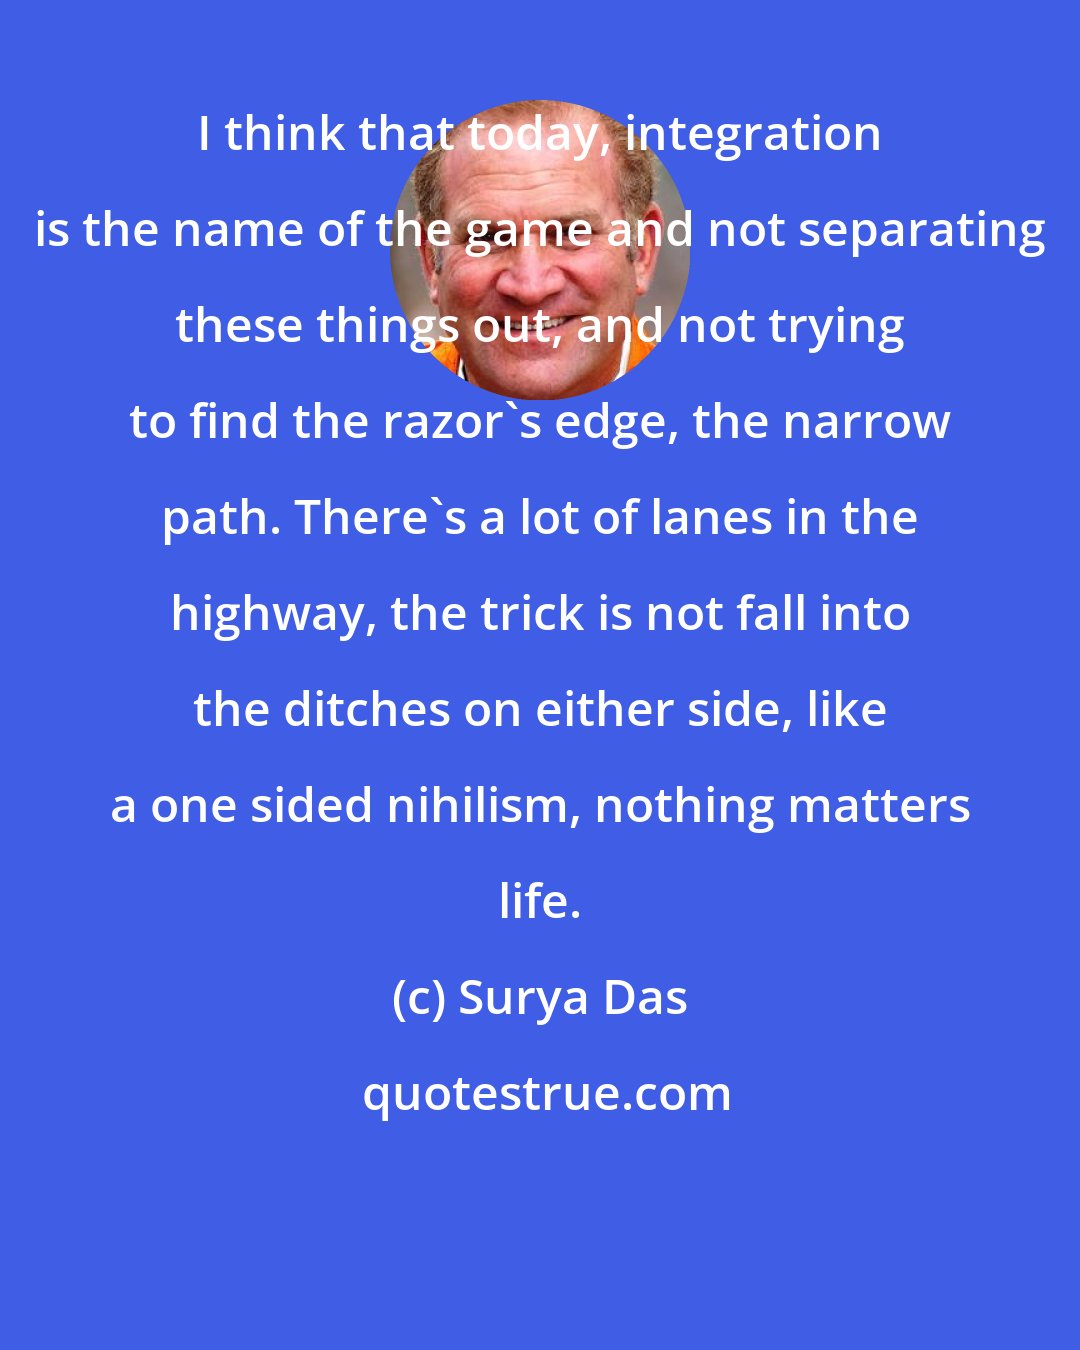 Surya Das: I think that today, integration is the name of the game and not separating these things out, and not trying to find the razor's edge, the narrow path. There's a lot of lanes in the highway, the trick is not fall into the ditches on either side, like a one sided nihilism, nothing matters life.